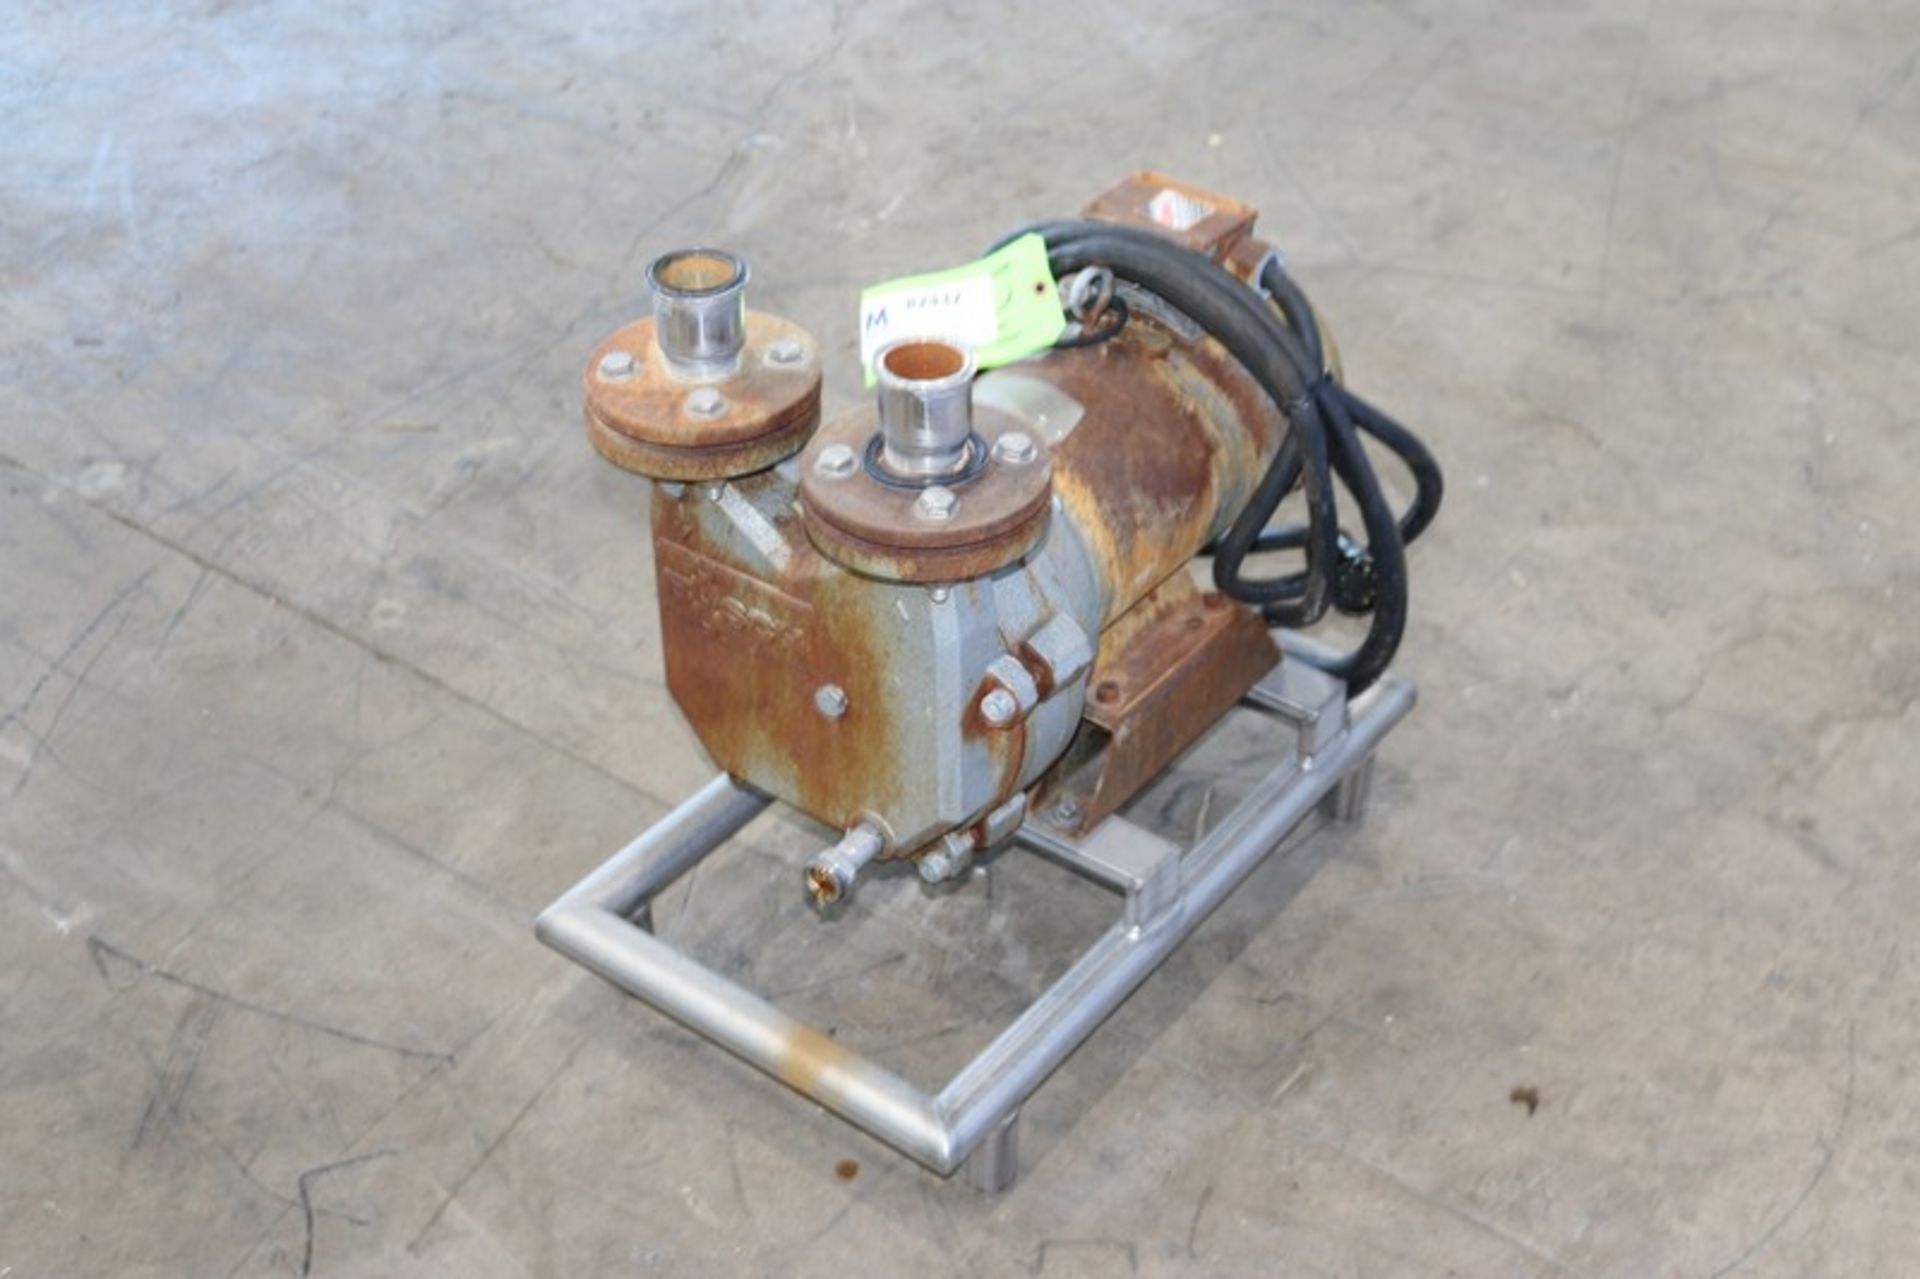 Buusch Vacuum Pump,with Baldor 1755 RPM Motor, 208-230/460 Volts, 3 Phase, with Associated Steam - Image 3 of 5